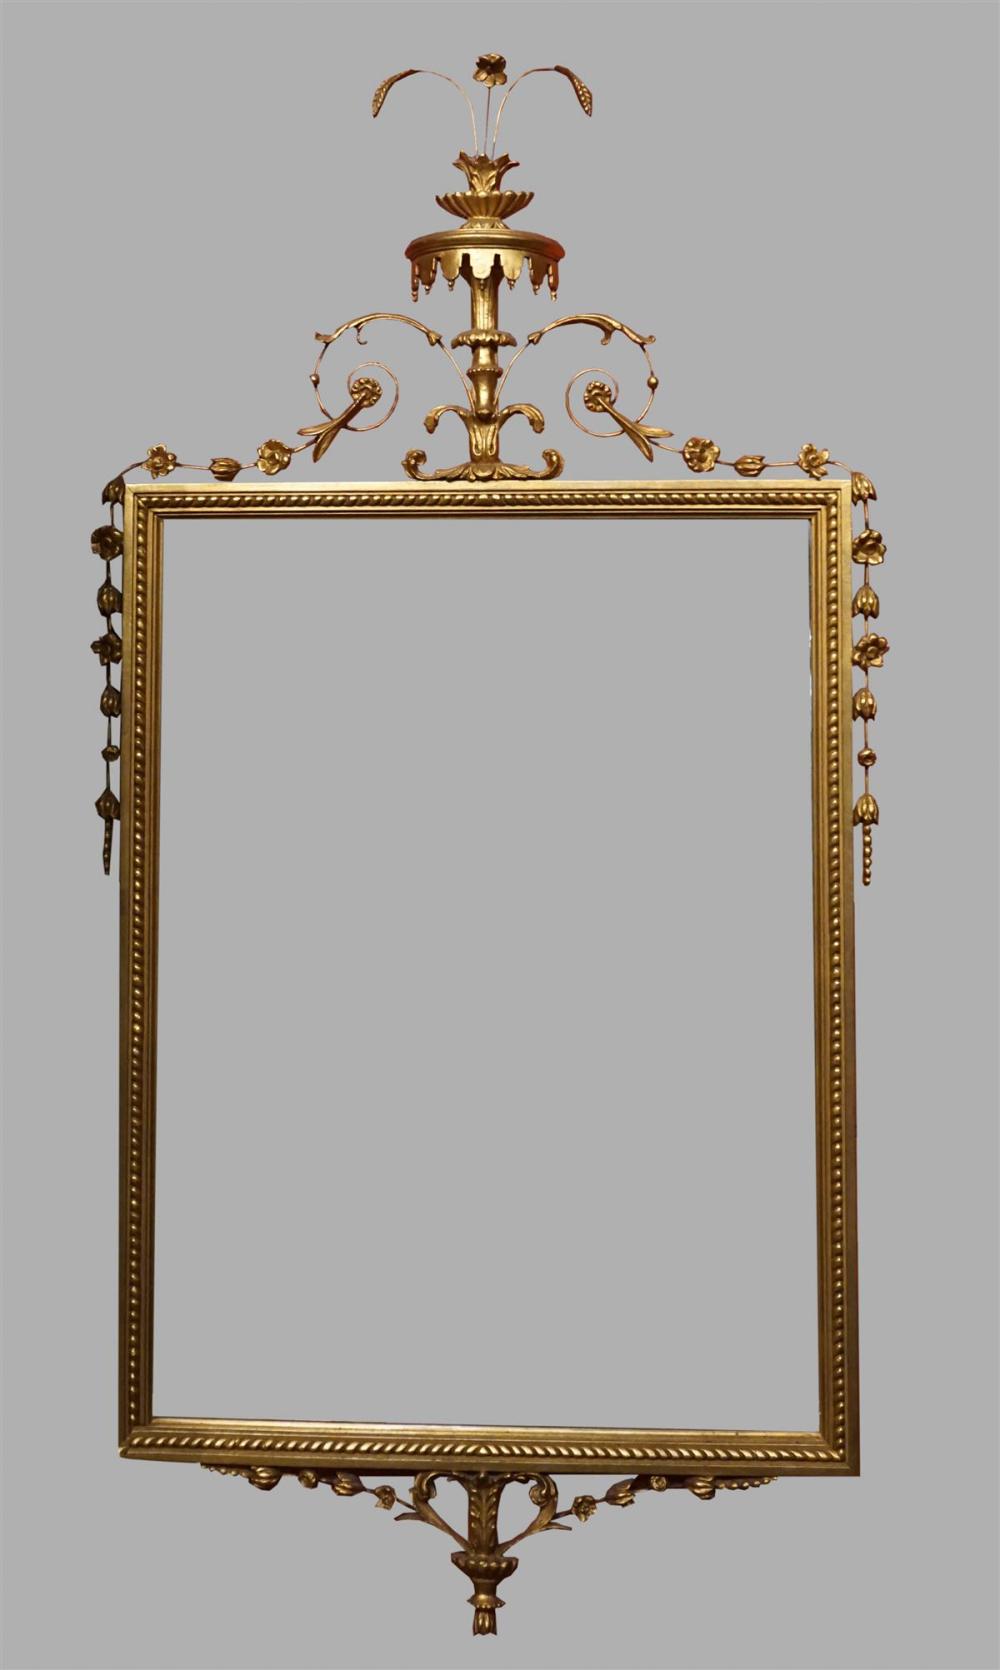 NEOCLASSICAL GILTWOOD MIRRORNEOCLASSICAL